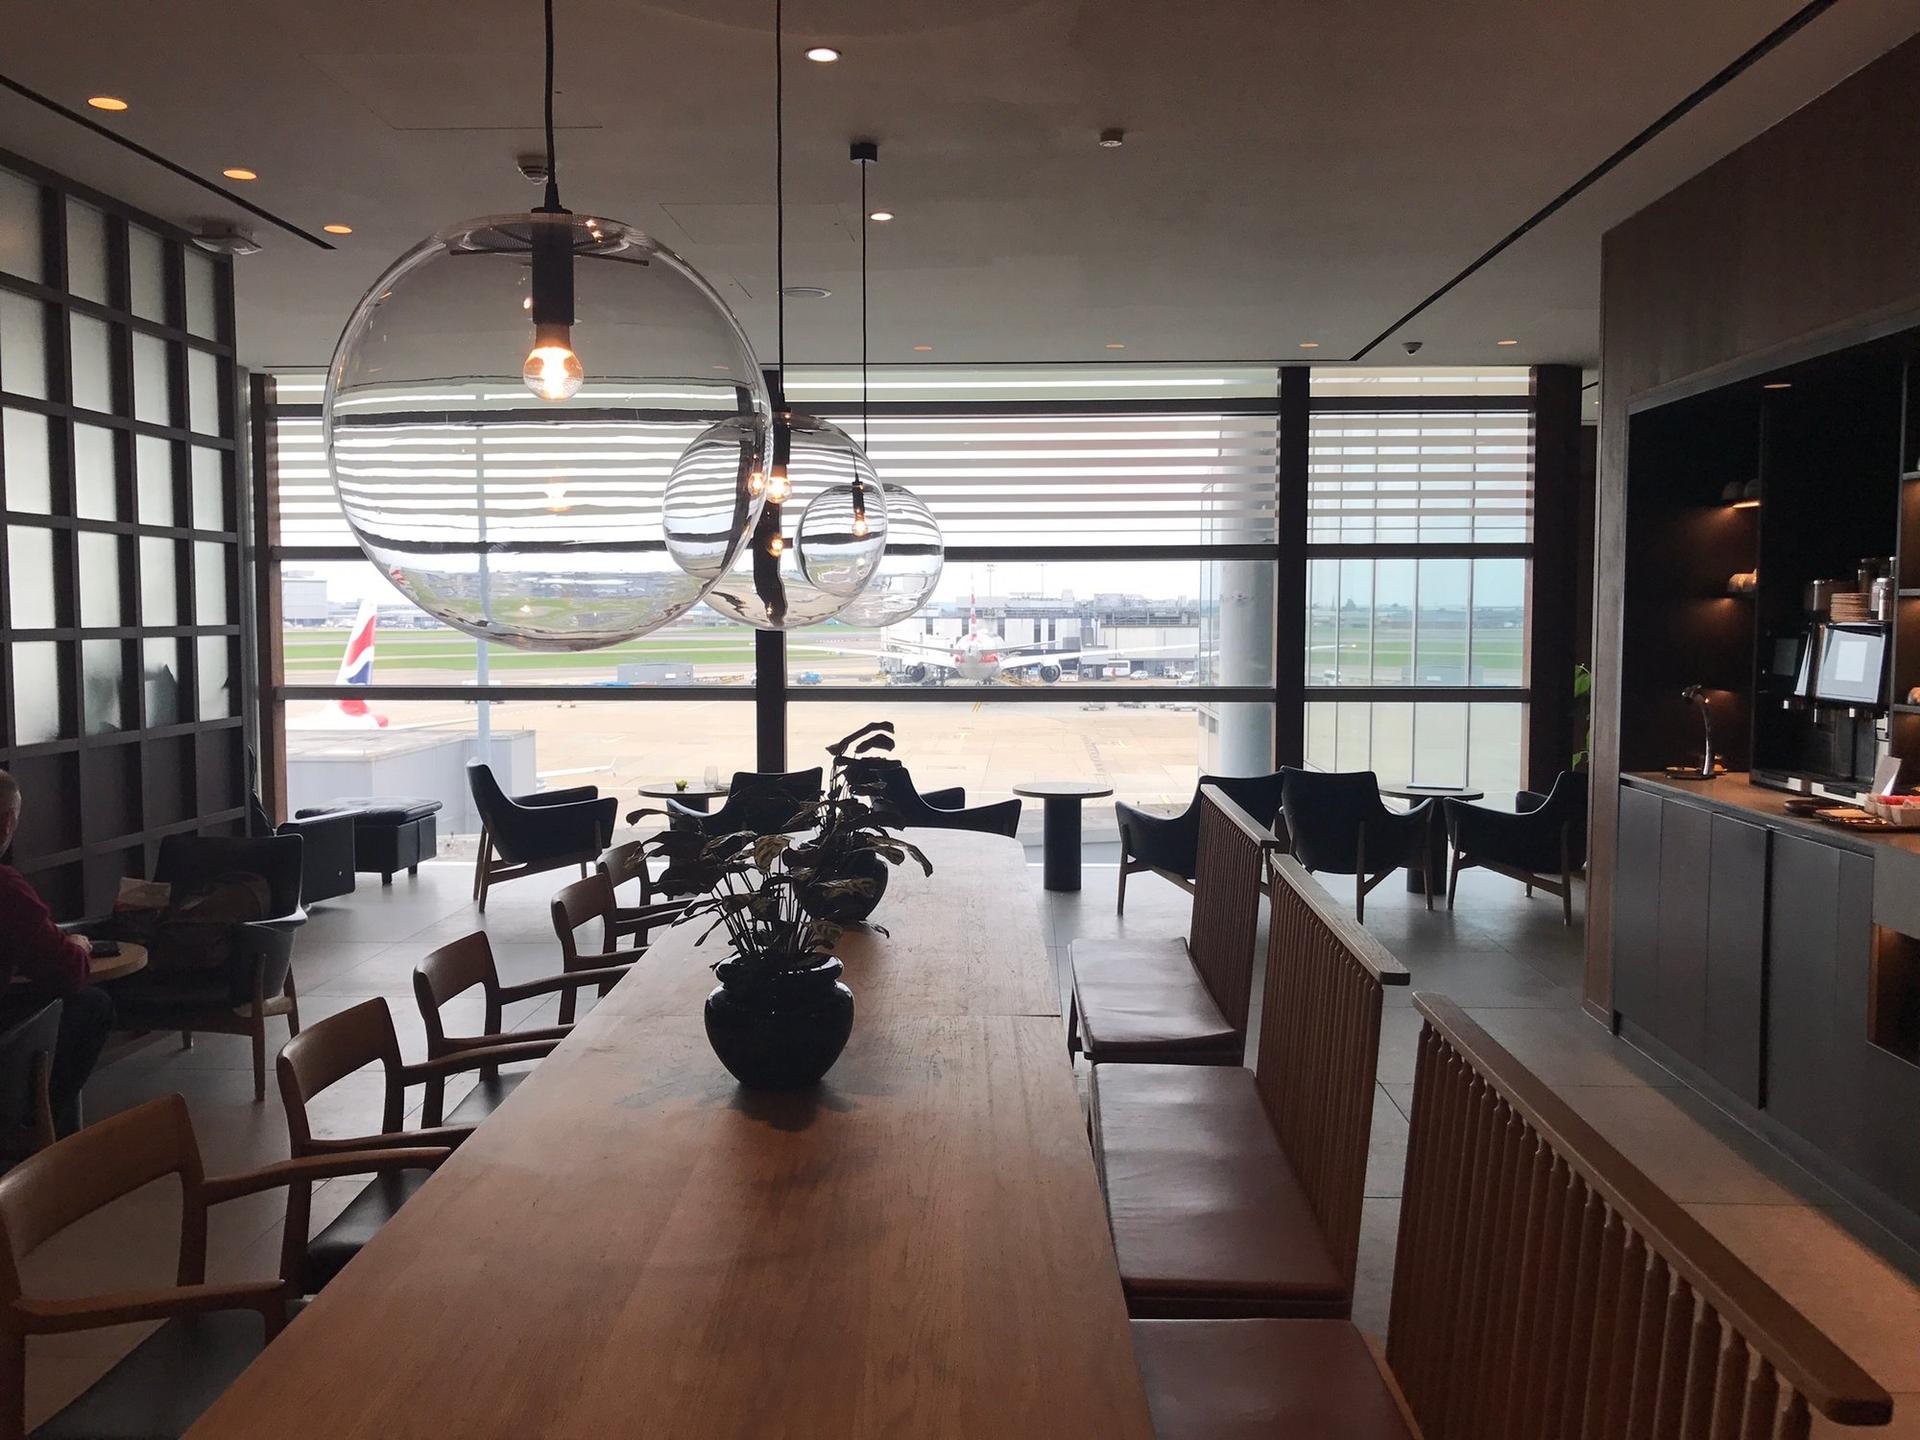 Cathay Pacific Business Class Lounge image 16 of 48